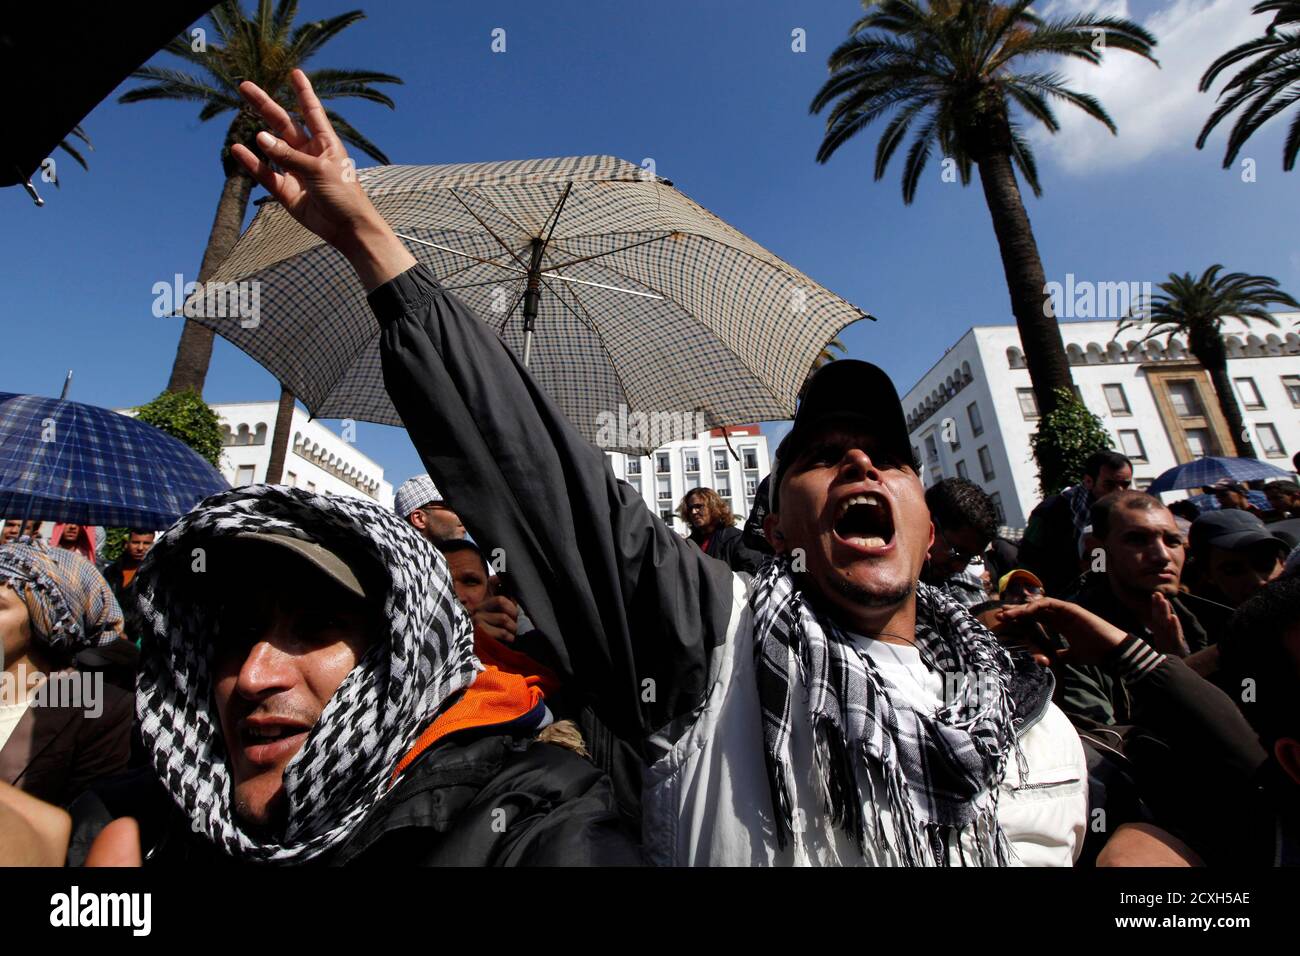 A man chants slogans during a protest in Rabat February 20, 2011. Thousands of protesters took to the streets in Morocco on Sunday demanding King Mohammed give up some of his powers, dismiss the government and clamp down on corruption.  EUTERS/Youssef Boudlal            (MOROCCO - Tags: POLITICS CIVIL UNREST) Stock Photo